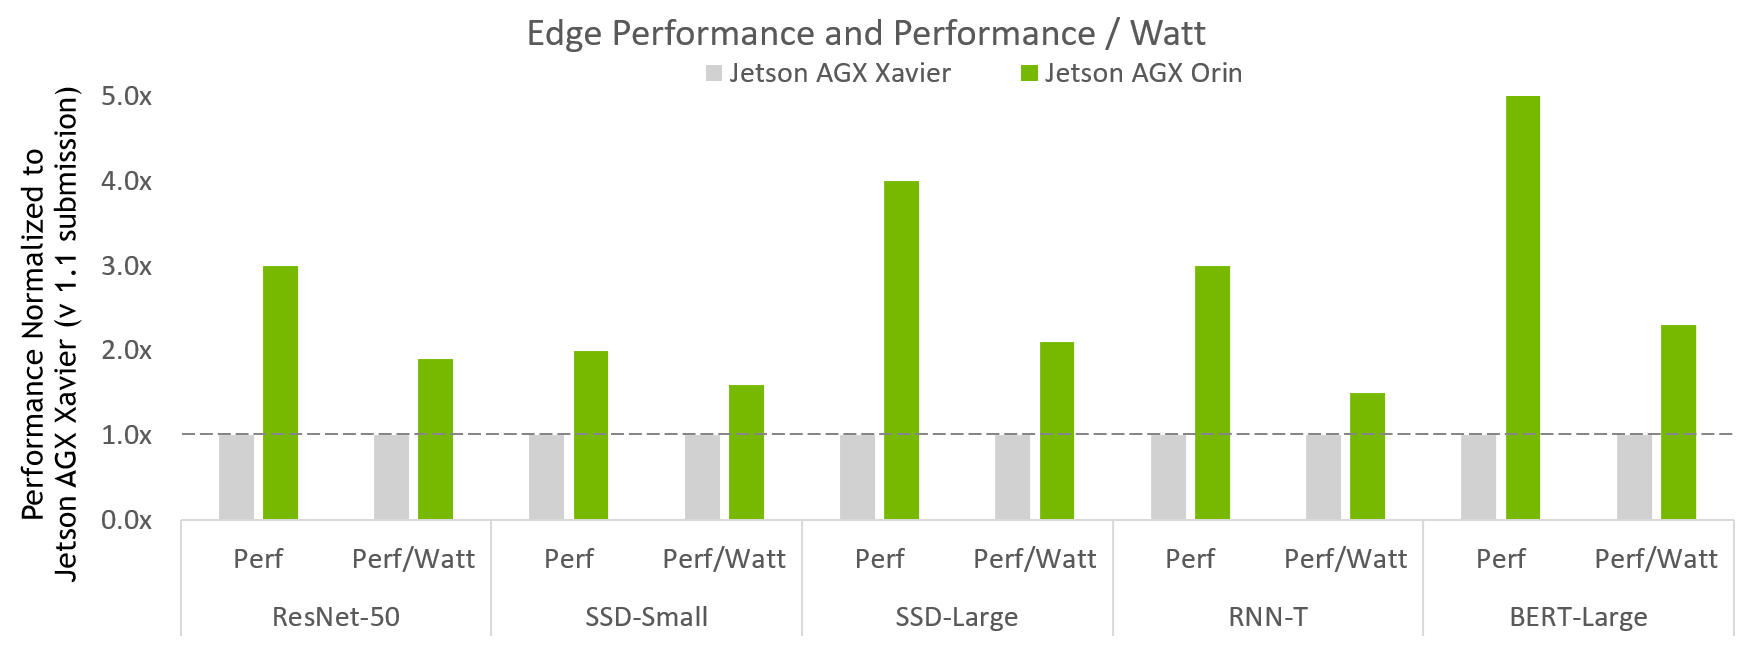 Chart shows that for edge performance and perf per watt, Jetson AGX Orin delivers up to 5x more than Jetson AGX Xavier and 2.3x more energy efficiency.
